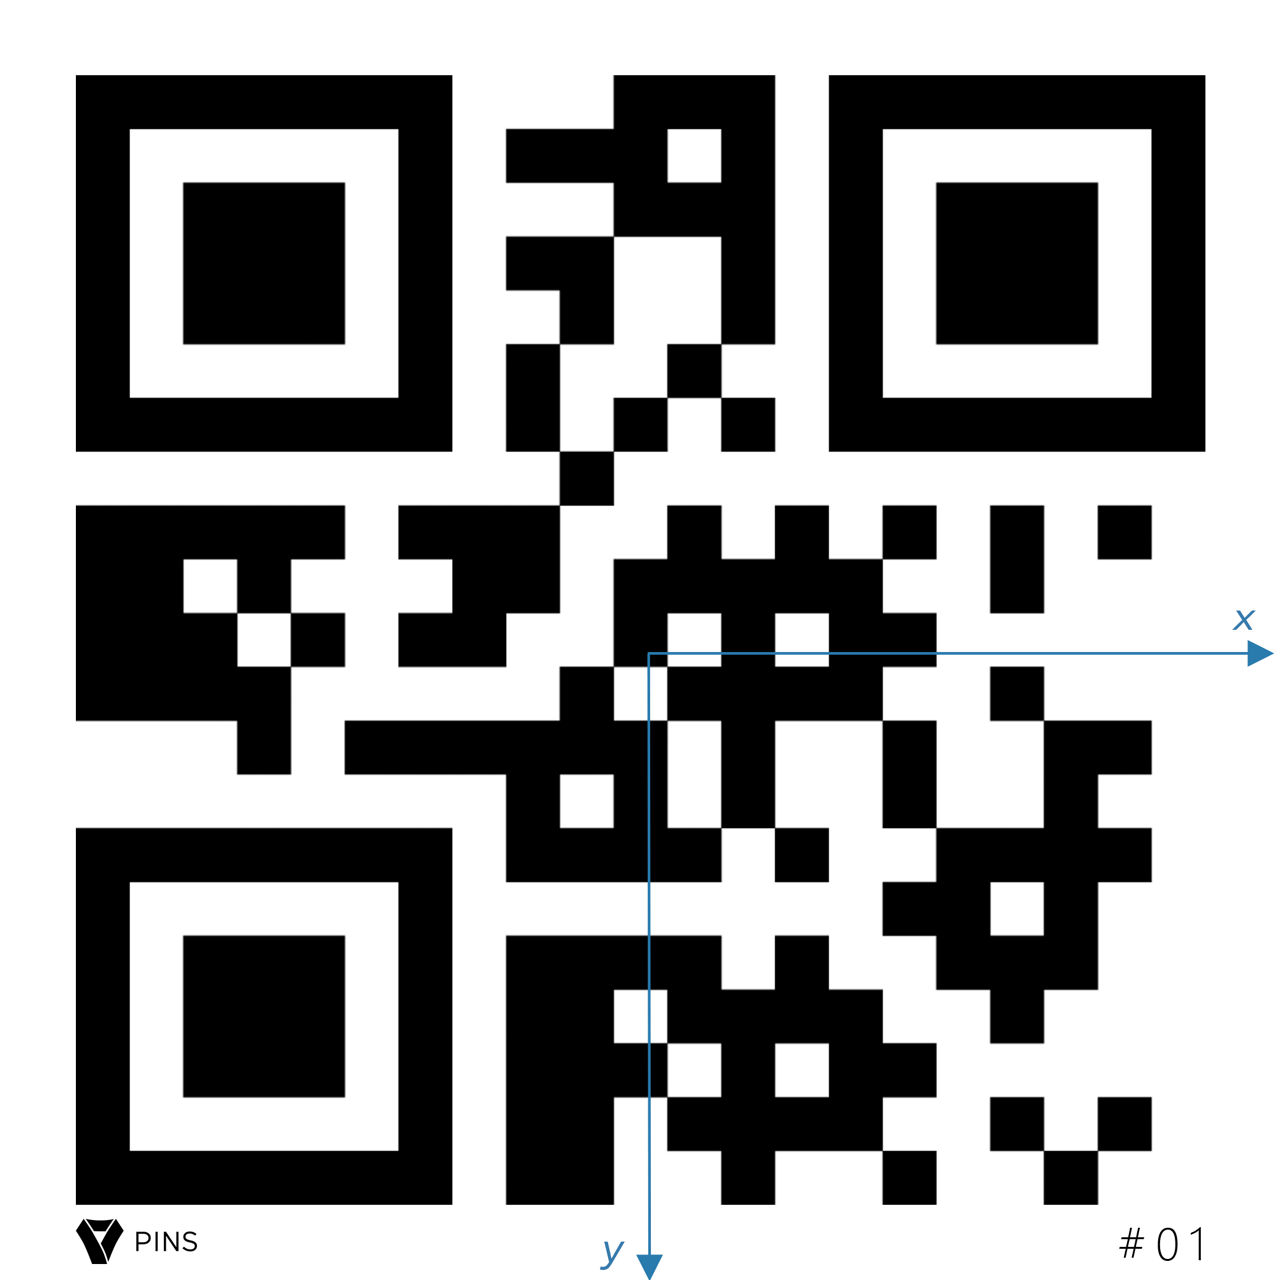 User: "QR marker with x and y coordinates."